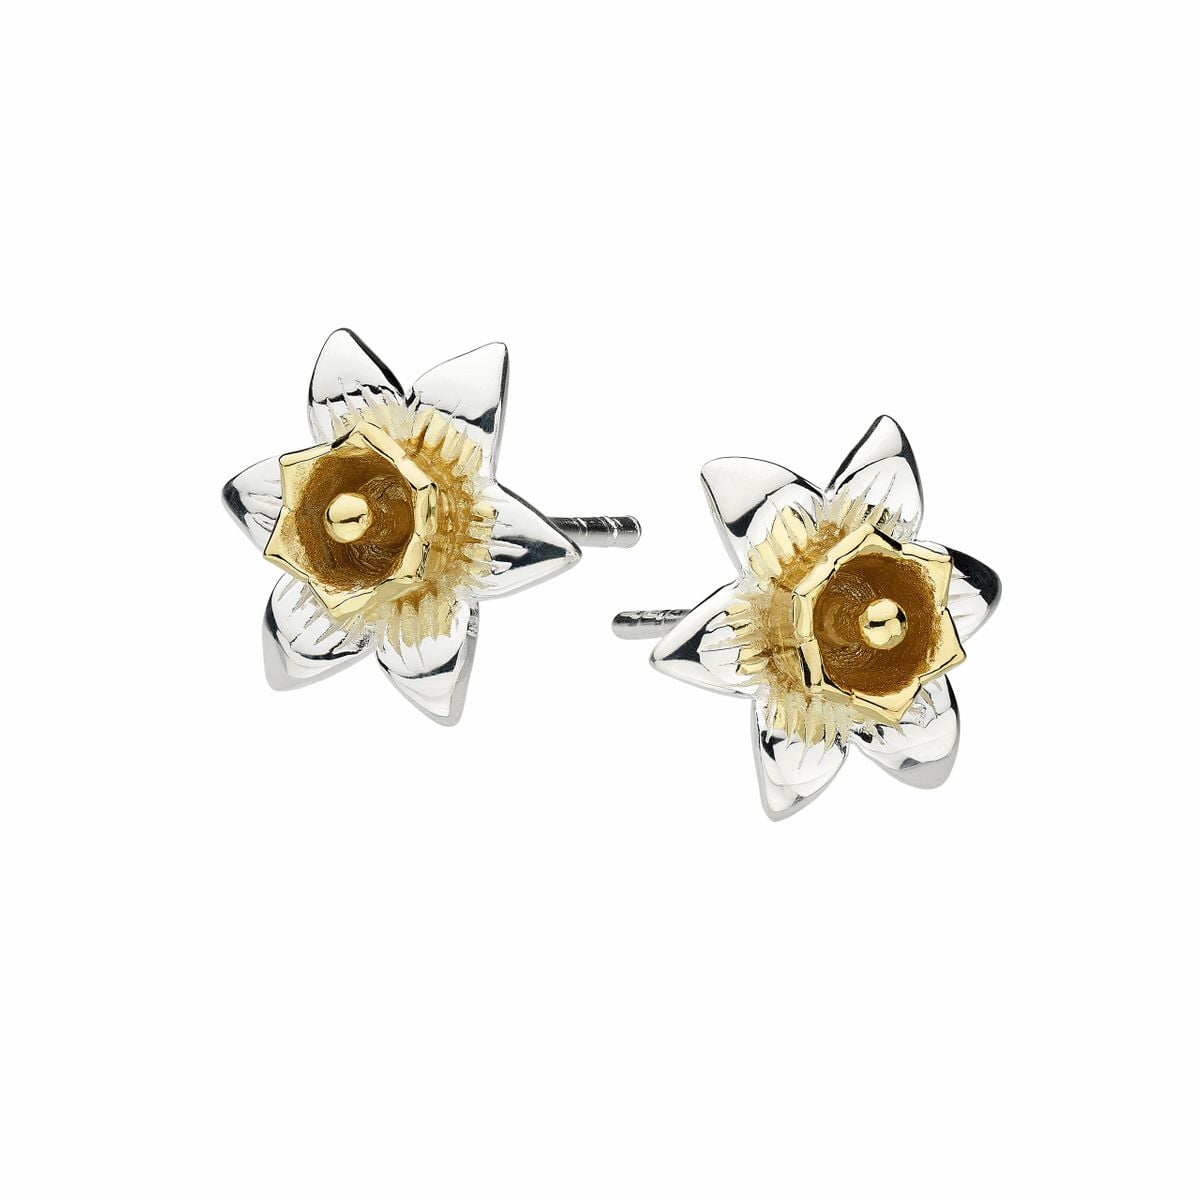 Daffodil Stud Earrings Sterling Silver 925 Hallmarked Gold Detail Studs